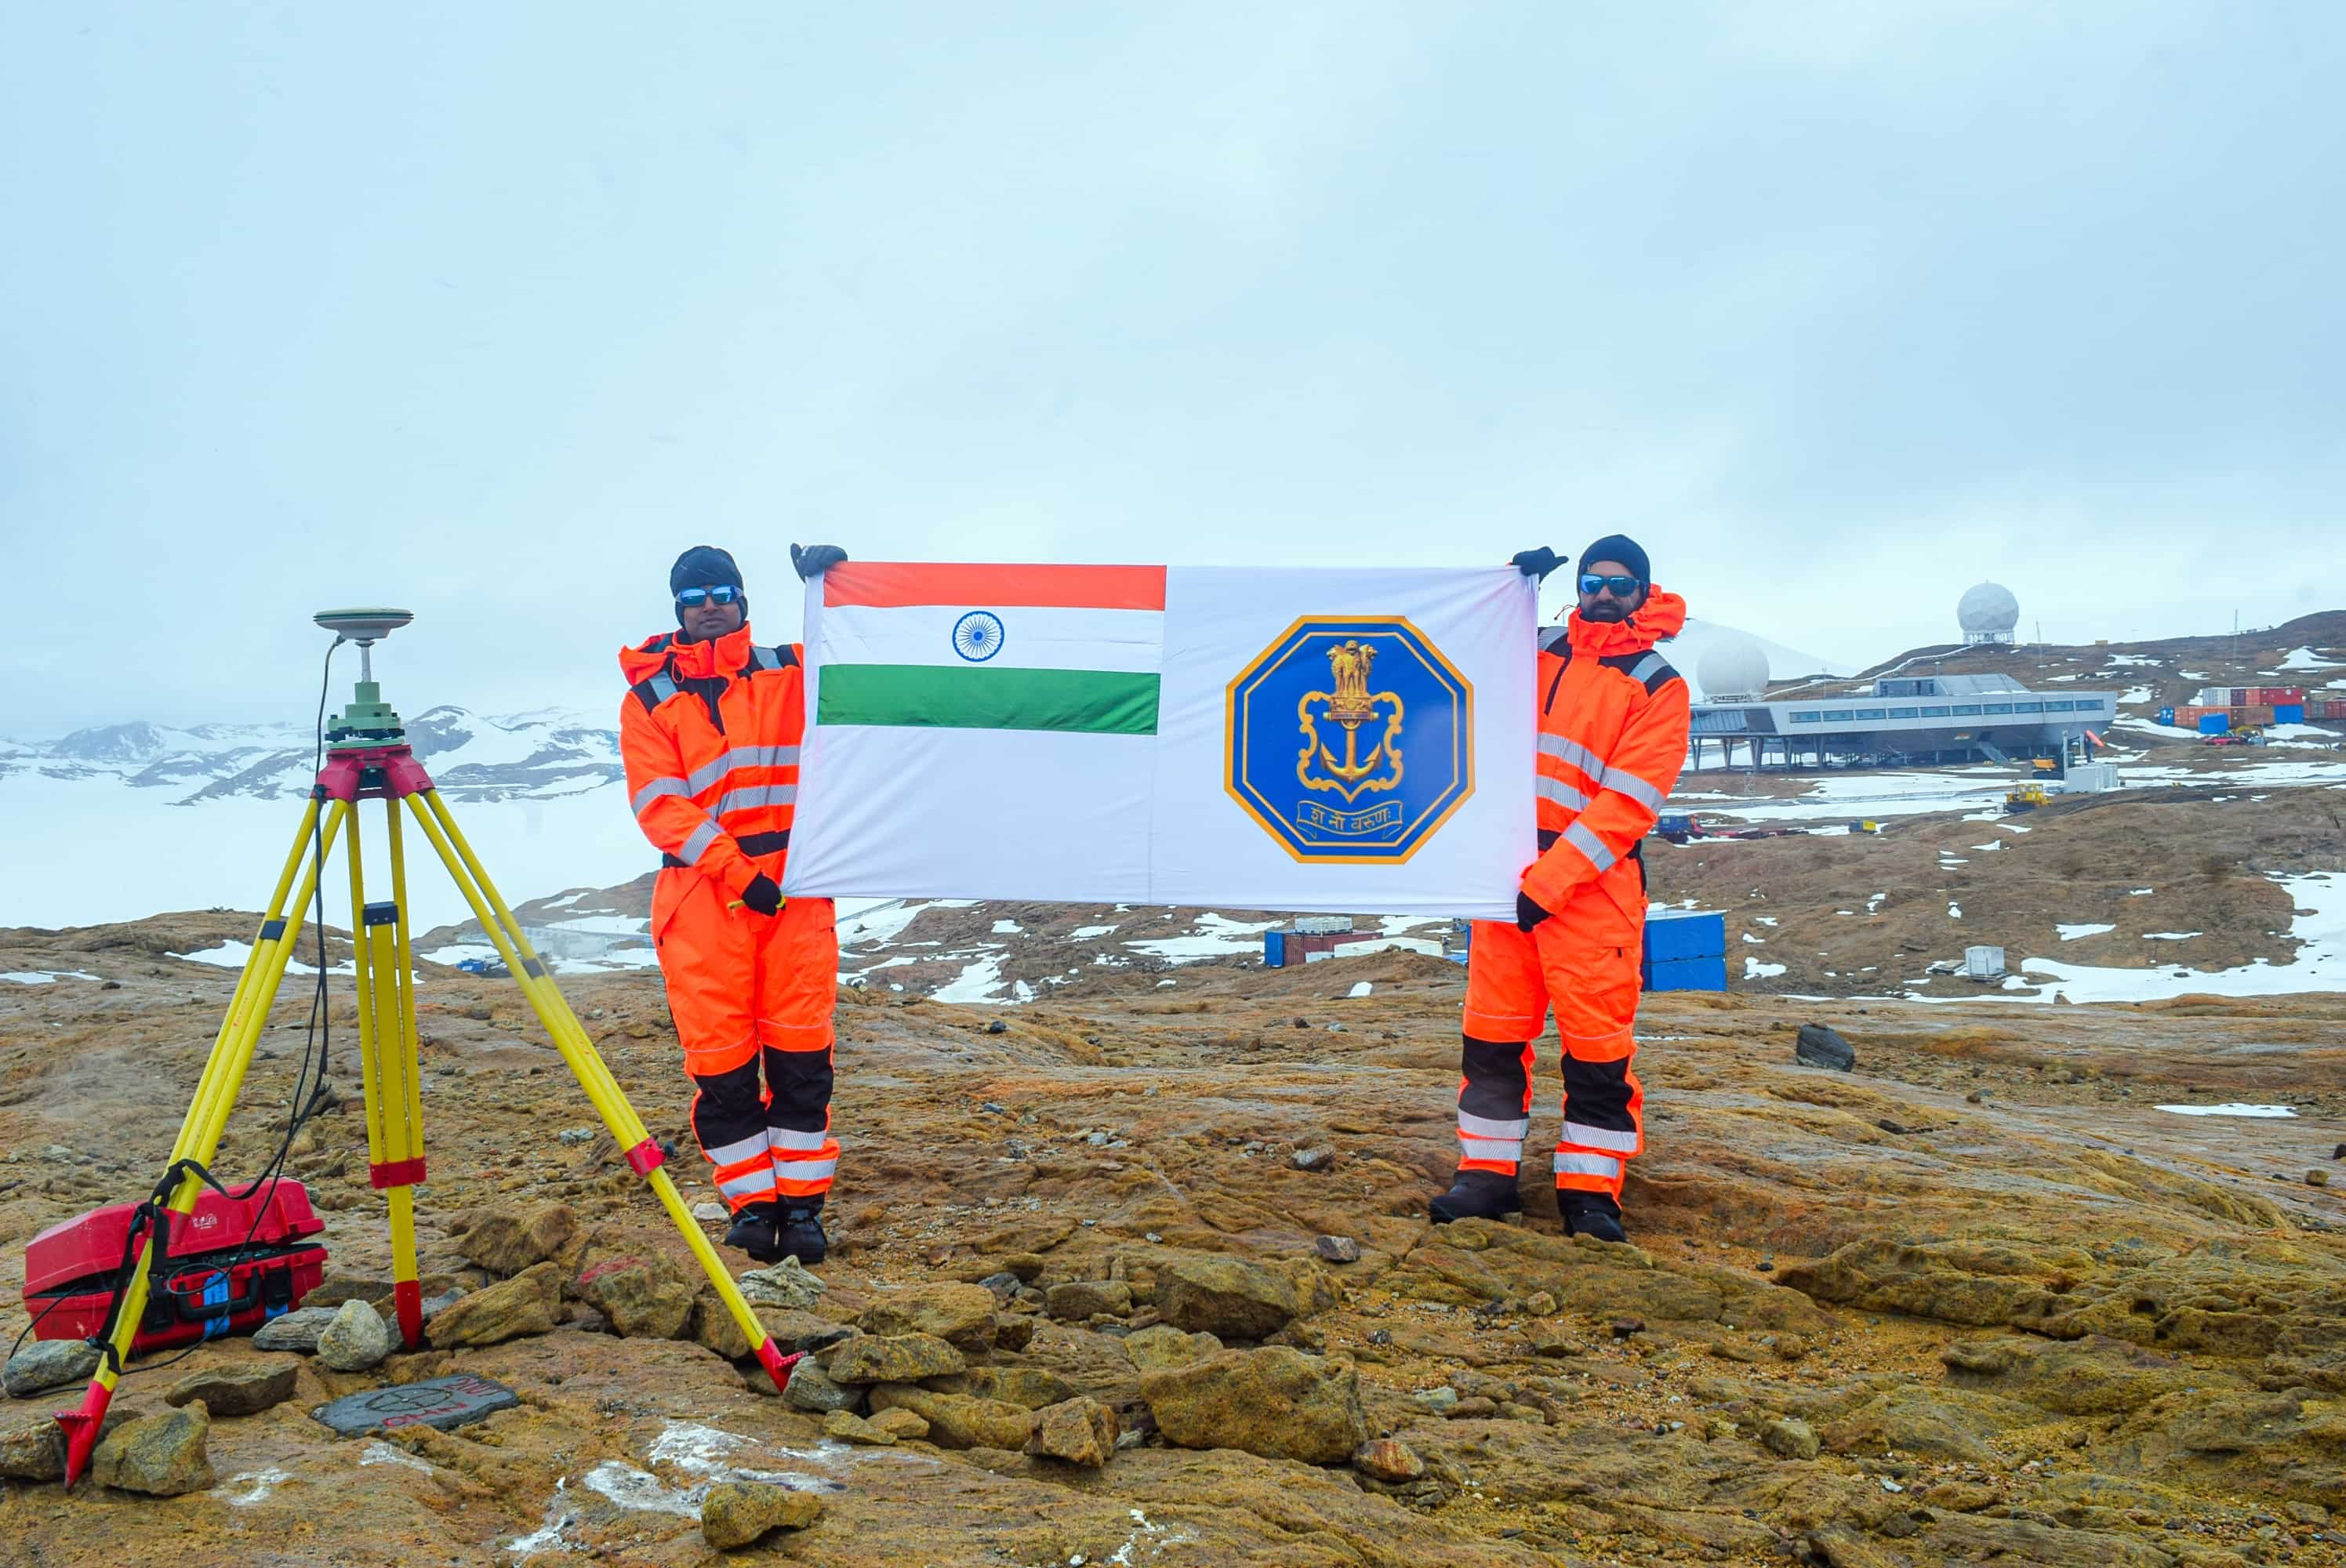 The Indian Flag and Indian Naval Ensign were hoisted by the INHD team in Antarctica, demonstrating the Indian Navy's operational reach for benign missions.